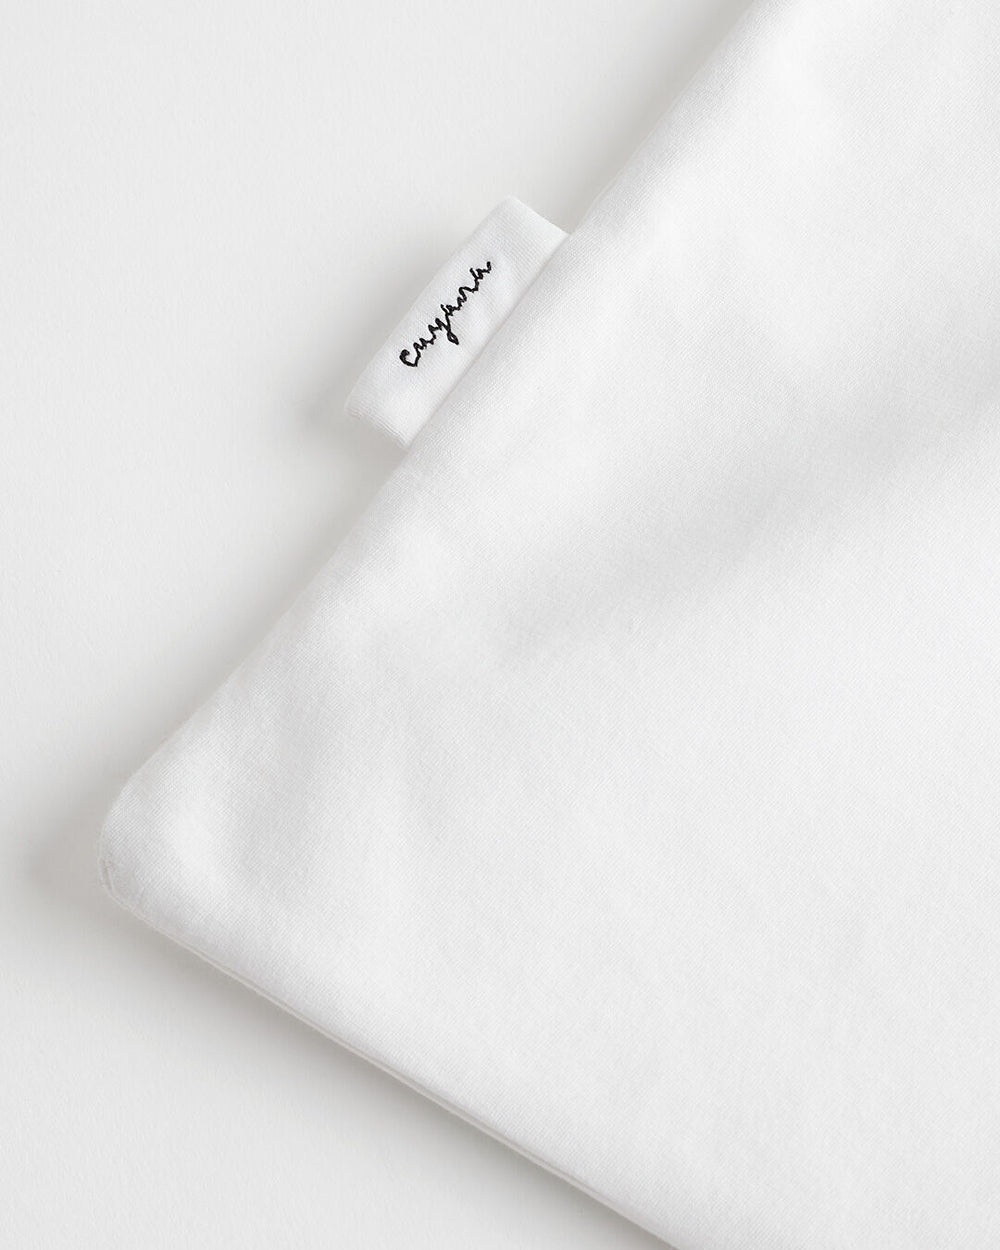 Folded fabric with a visible label marked 'Cuyana'